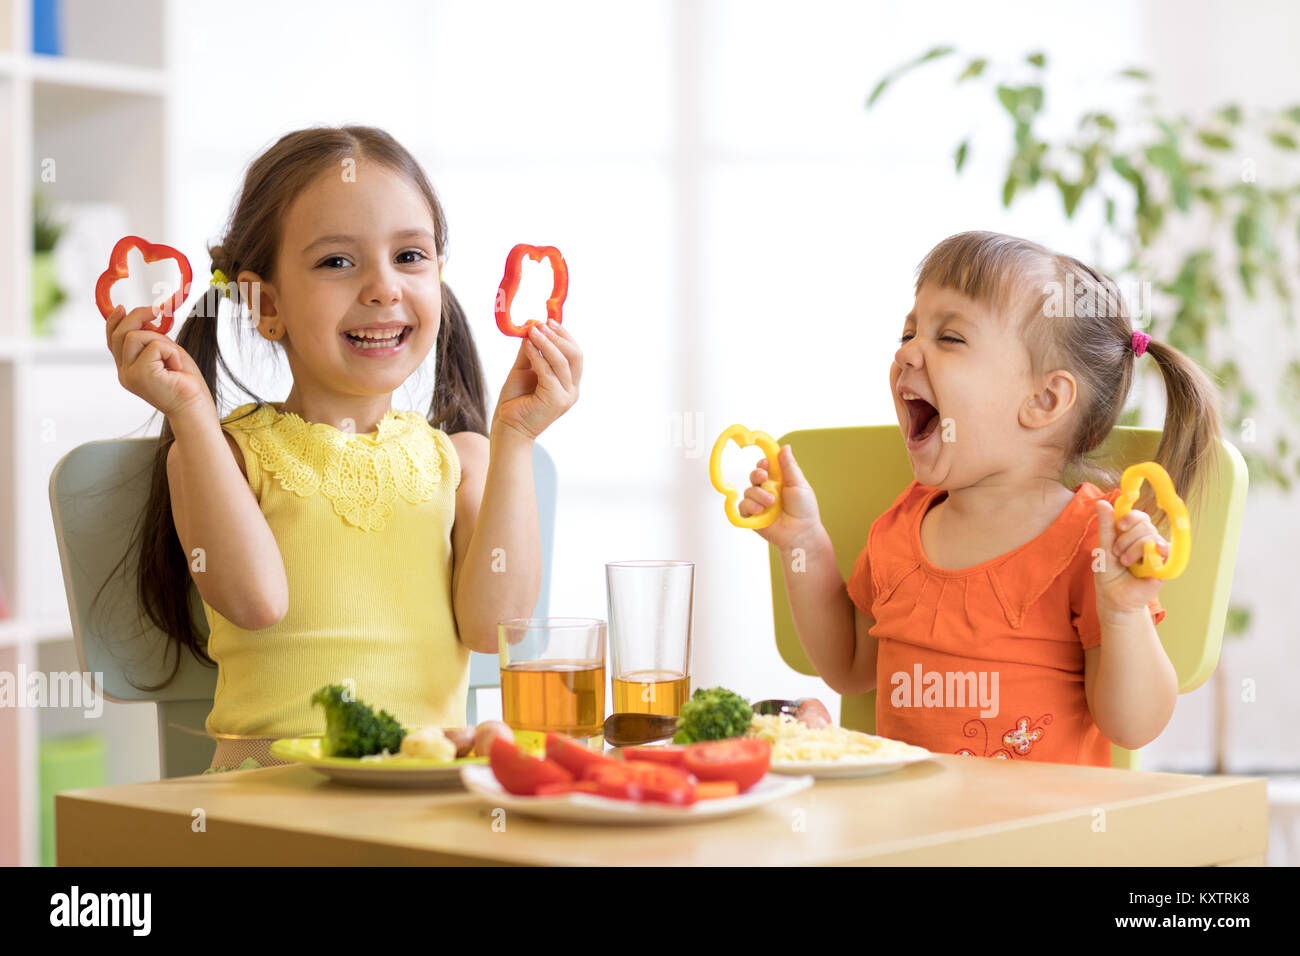 Funny playful children girls eating healthy food. Kids lunch at home or kindergarten. Stock Photo